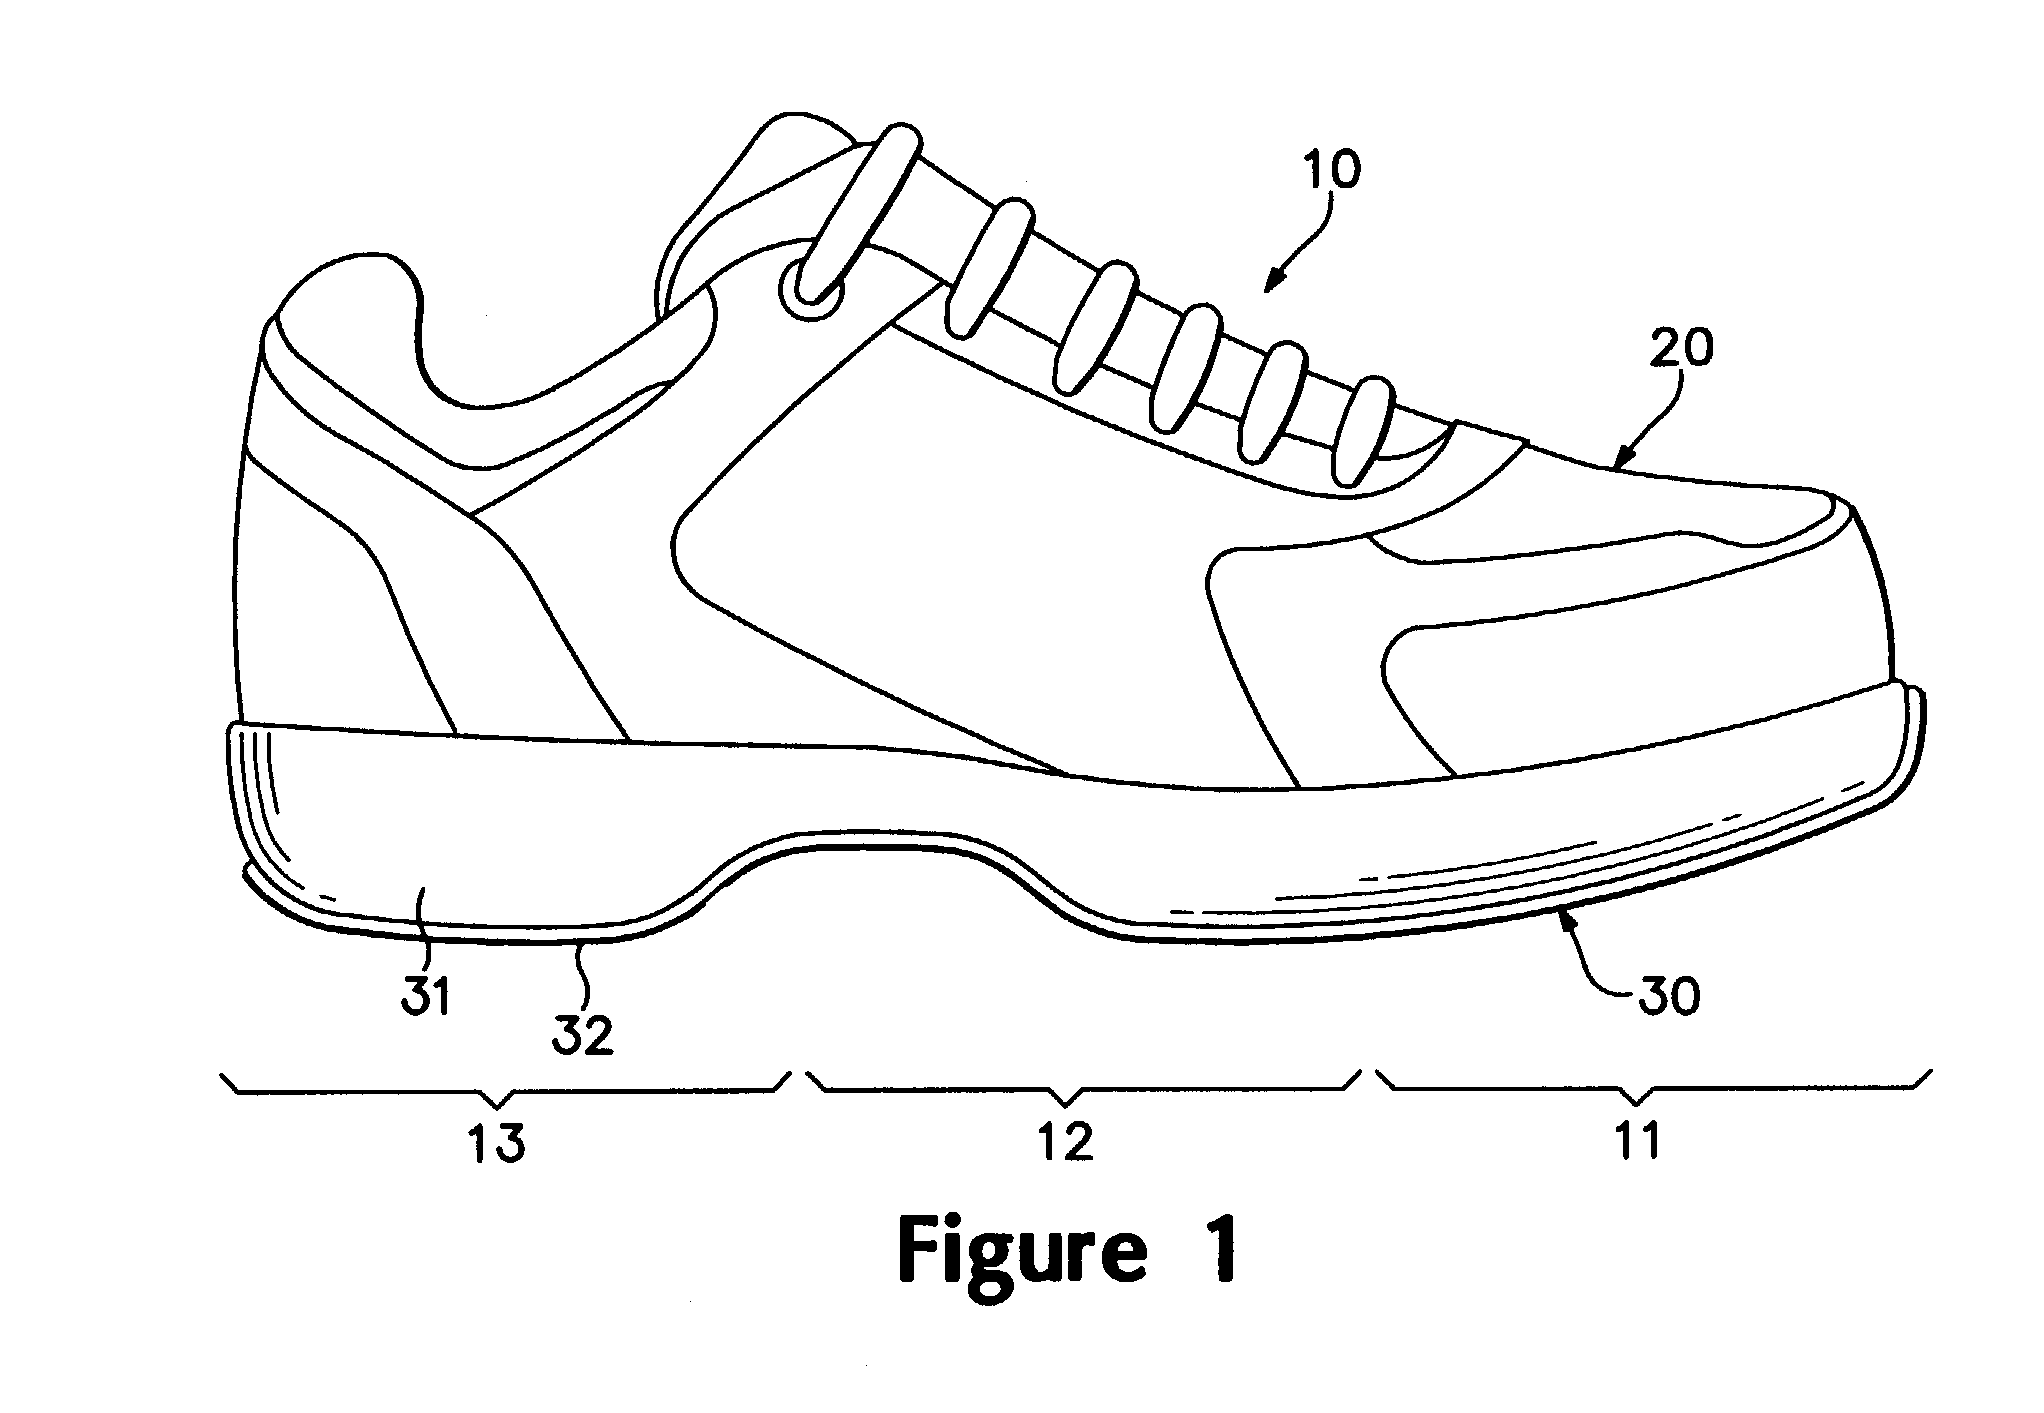 Article of footwear having a suspended footbed